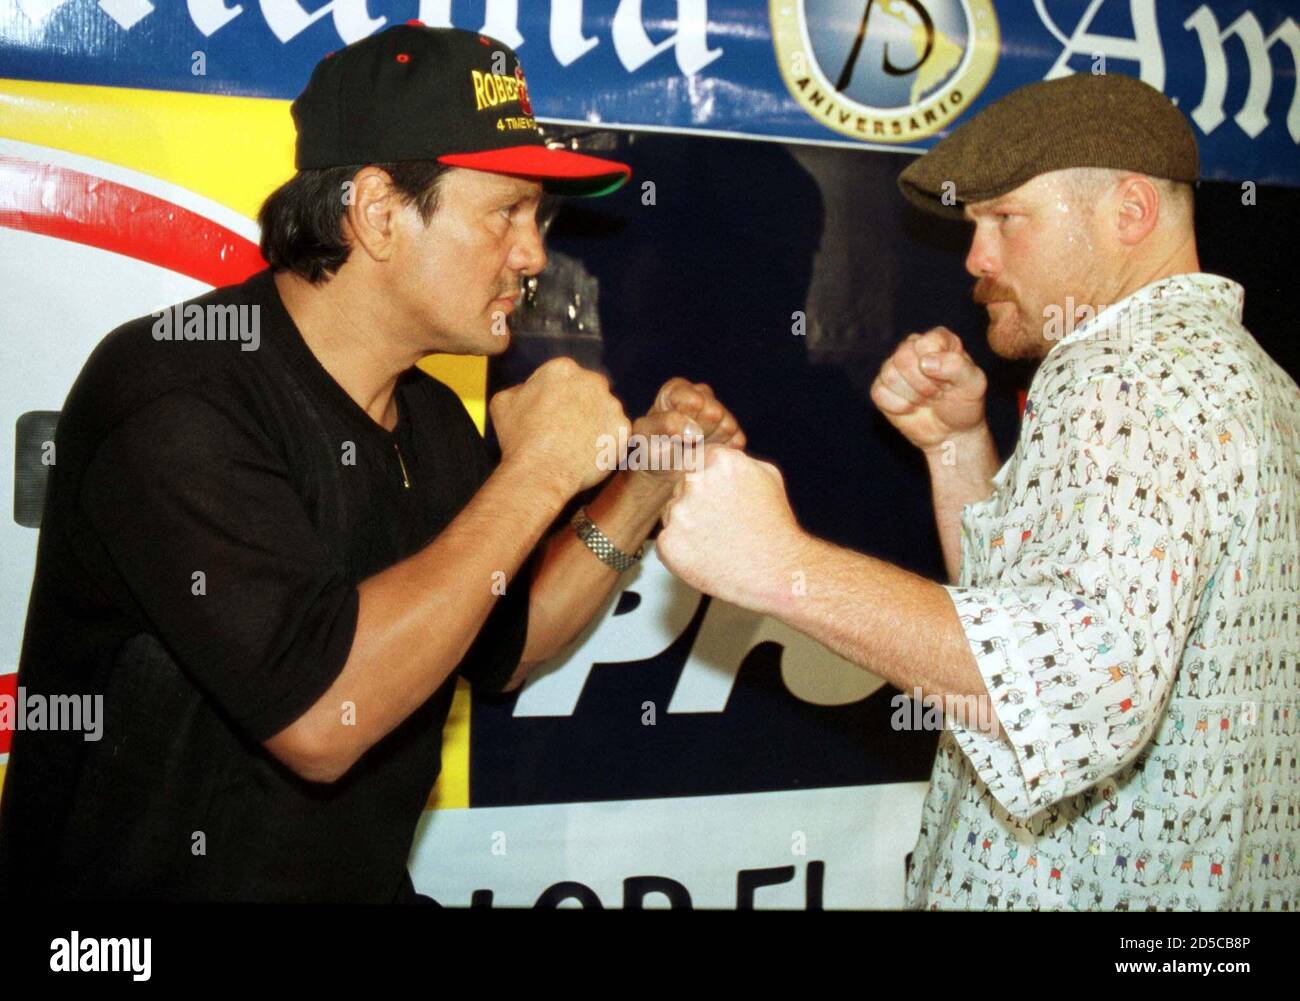 Veteran Panama Boxer Roberto Duran L Squares Up To Pat Lawlor R At A Press Conference To Promote Their June 16 Clash For The National Boxing Association Nba Super Middleweight Title In Panama